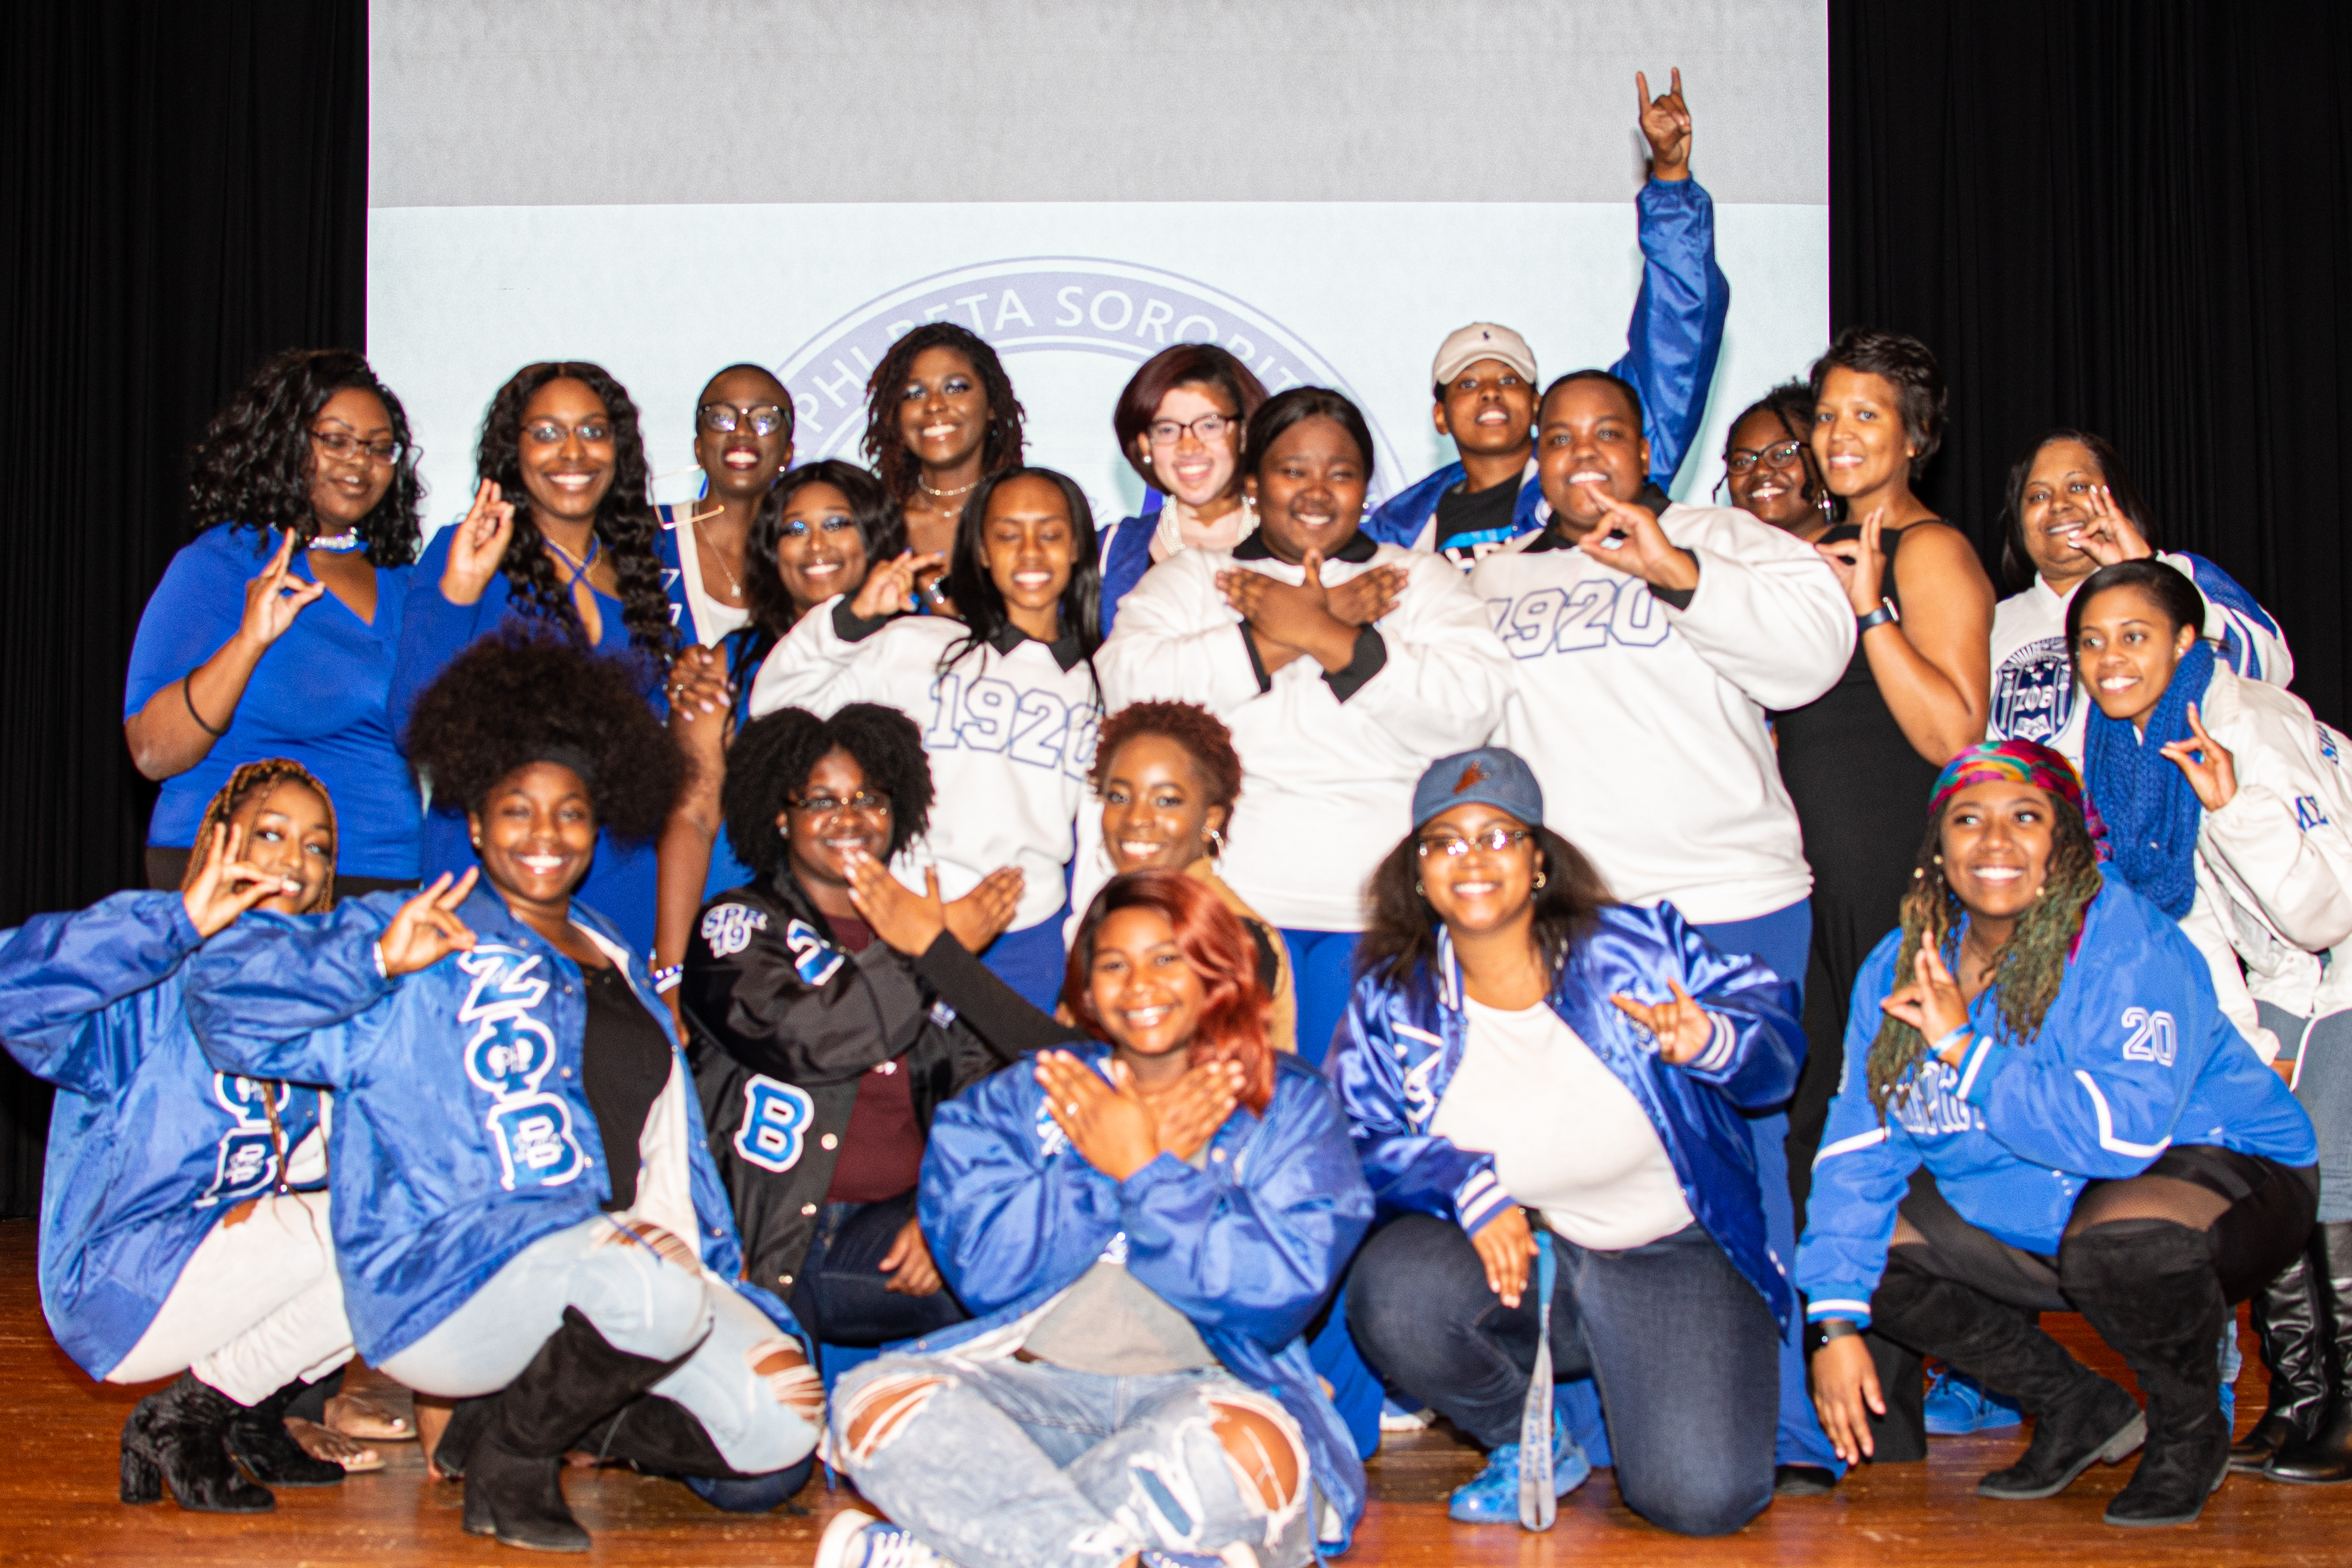 Members of Zeta Phi Beta Sorority, Inc. gather on stage for a group photo after their new member presentation.